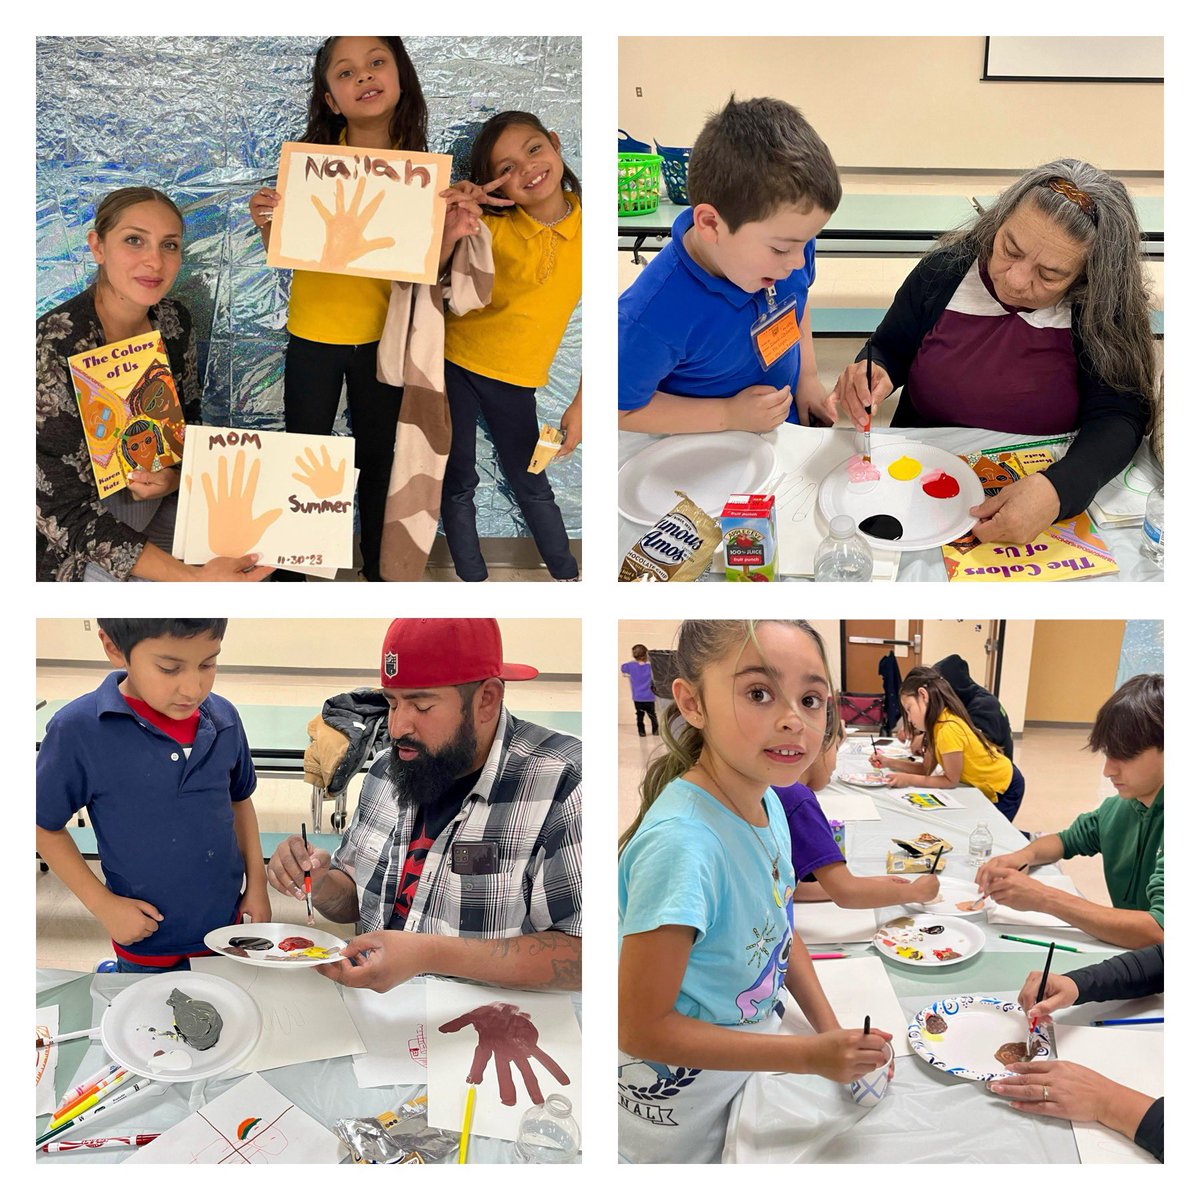 Thank you to all the families who joined us last night for our book reading, “The Color of Us” and Art activity. #GreatFuturesStartHere  #bgcep 
#ExpandedLearning #clubsambrano @jlsambrano  #TexasACE